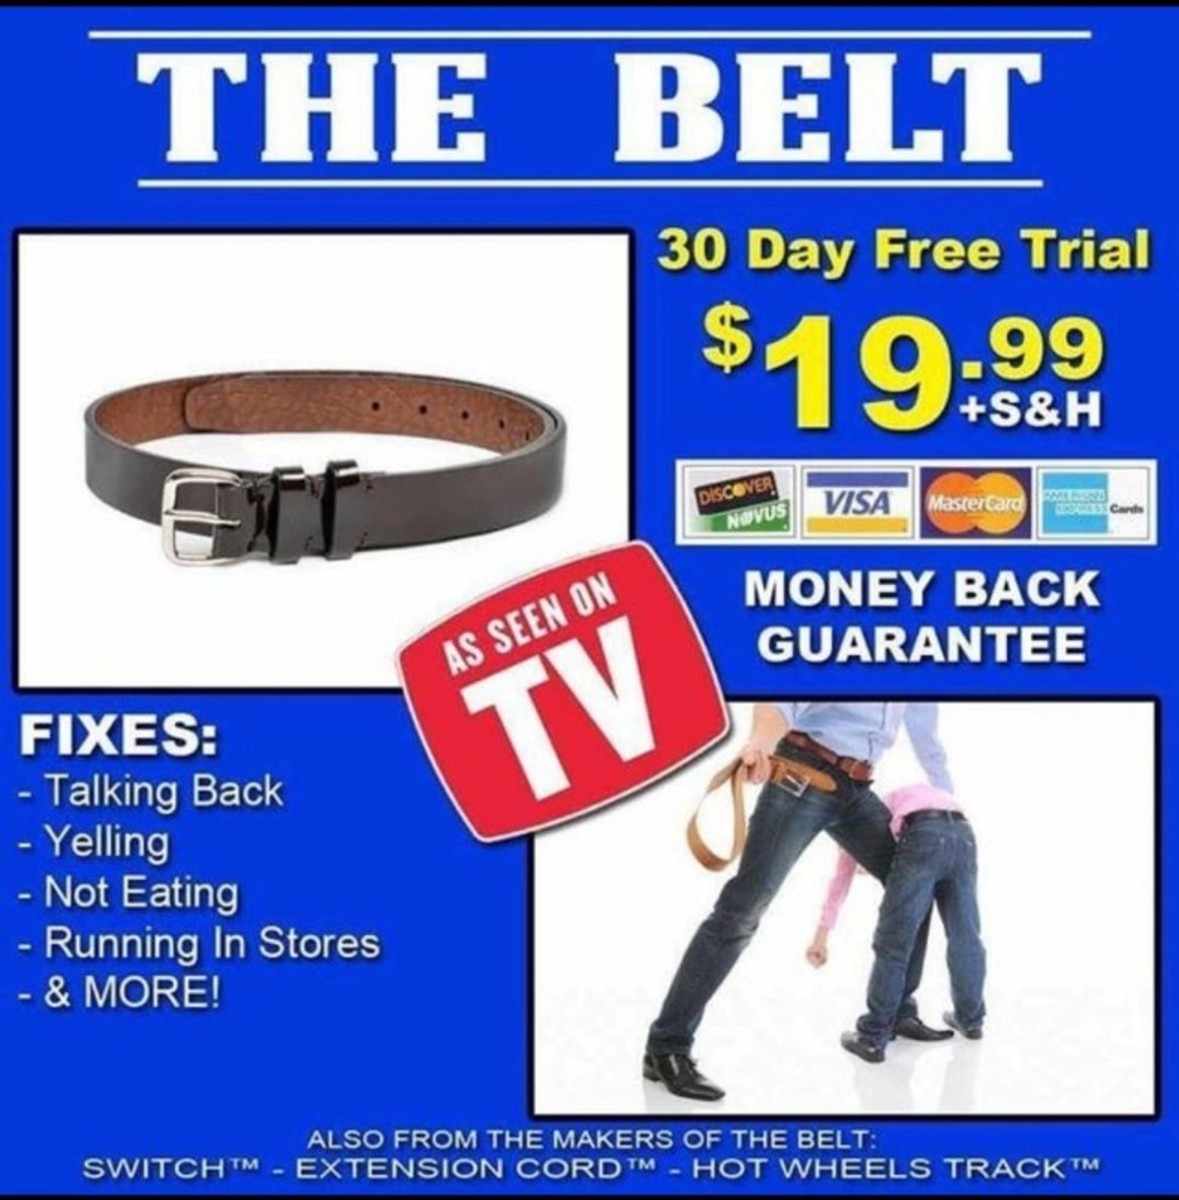 Belts, switches, extension cords, Hot Wheels track. Weapons to abuse your child with. 